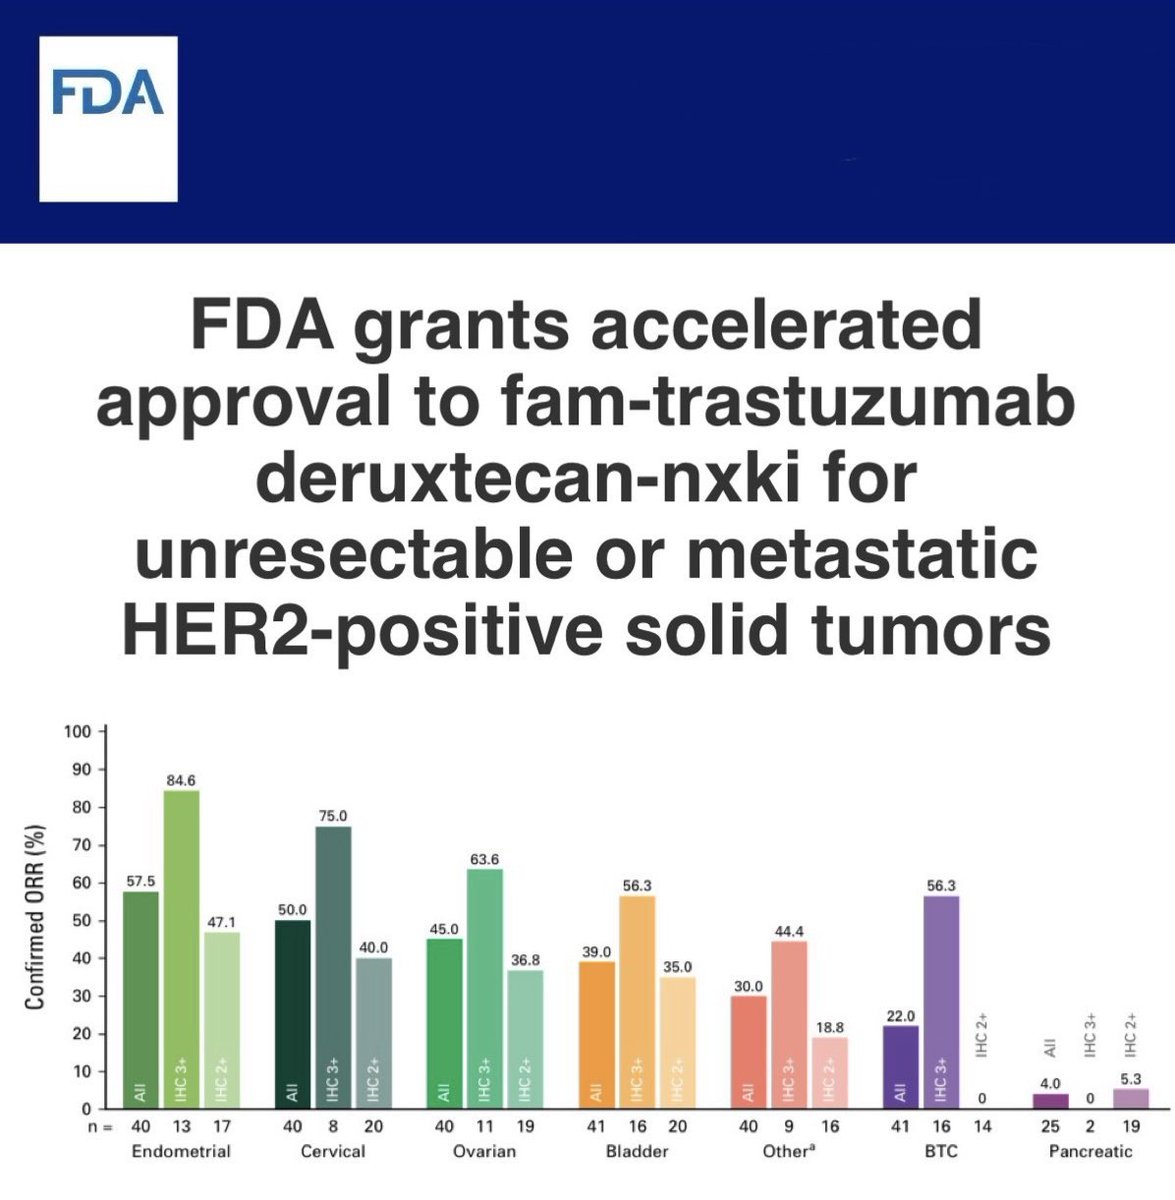 ⭐️1st ADC Pan-cancer approval ⭐️ by FDA for HER-2 3+ treatment refractory cancers - based on DESTINY trial. Important to highlight again the huge gains to be had here for GYN cancer patients with ⬆️⬆️ORRs. ⏰is ticking for 🇨🇦 women to get access @GCI_Cluster @BCCancer